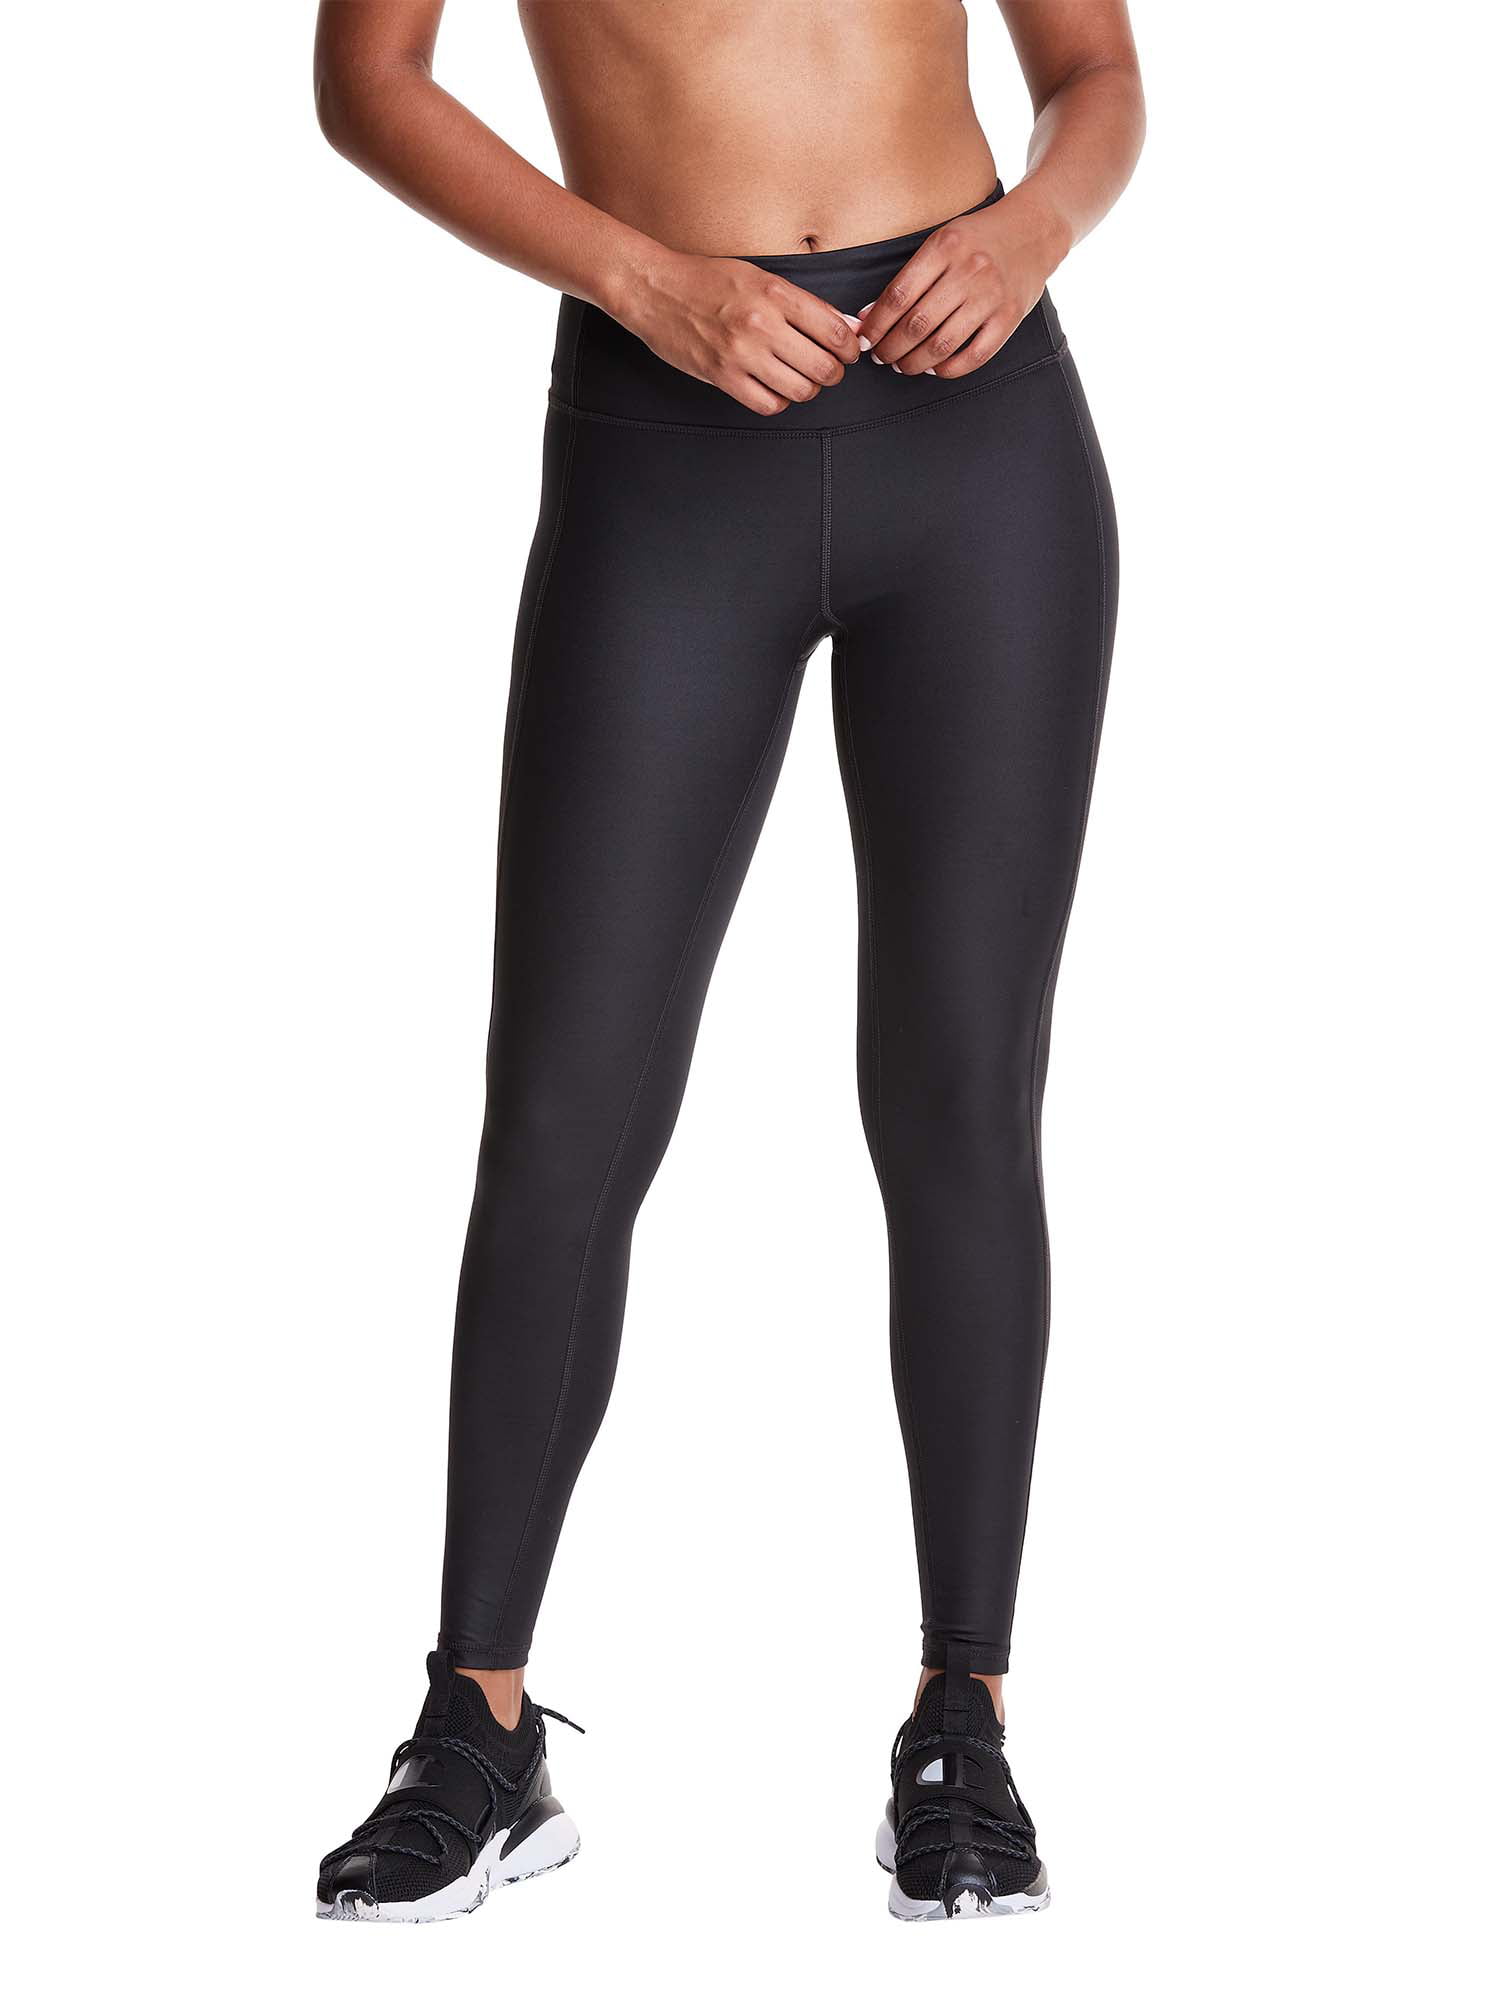 Genuine Authentic Skins Women's Compression DNAmic TEAM Women's Long Tights Aust 